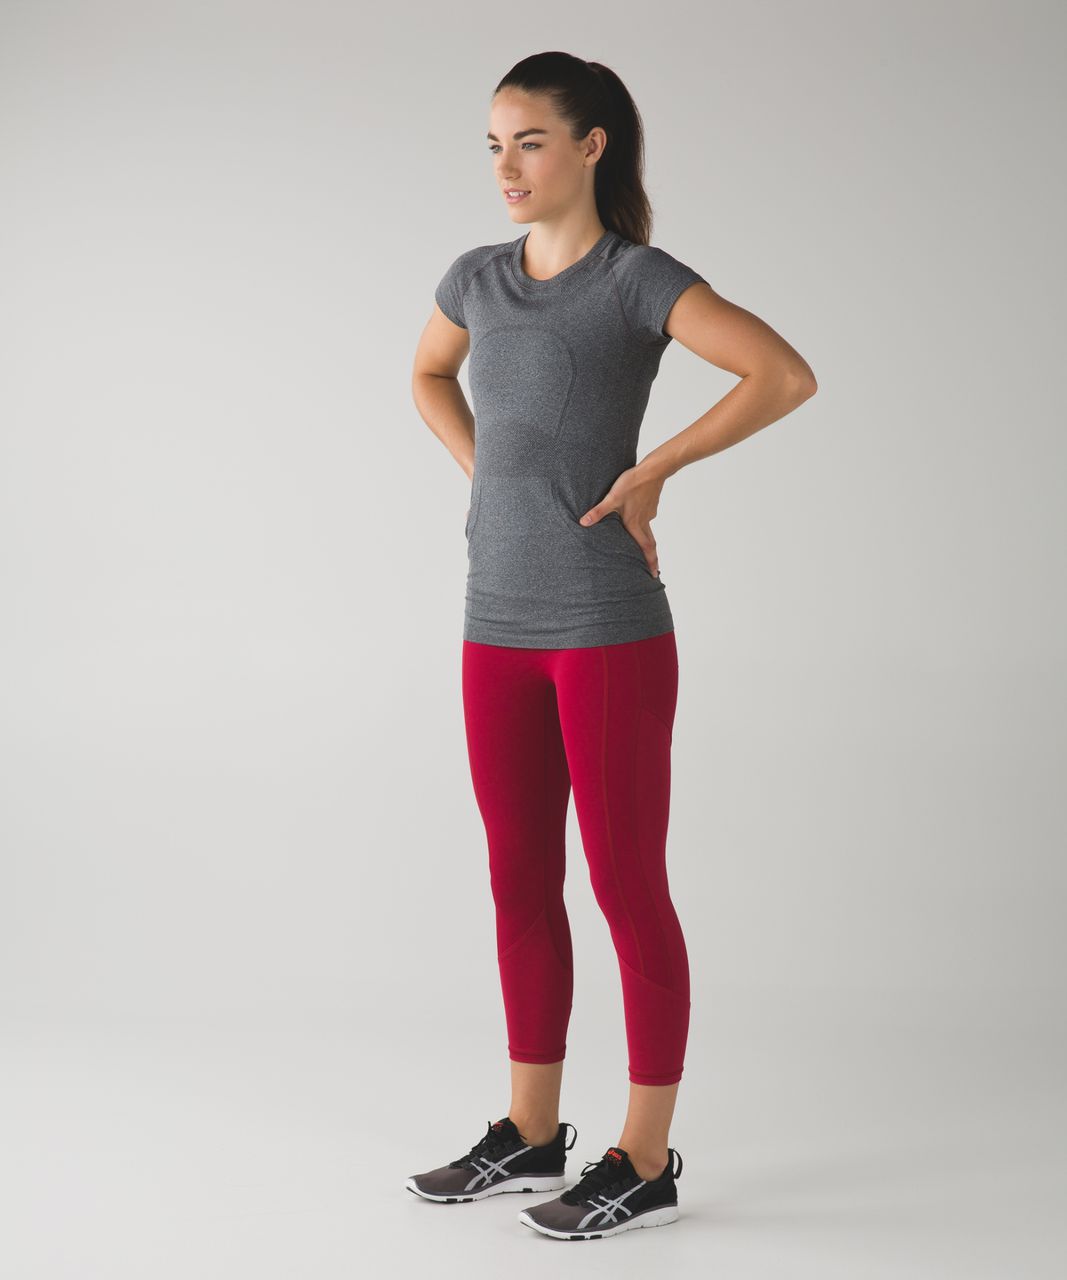 Lululemon All The Right Places Crop - Cranberry / Windy Blooms Regal Plum Multi